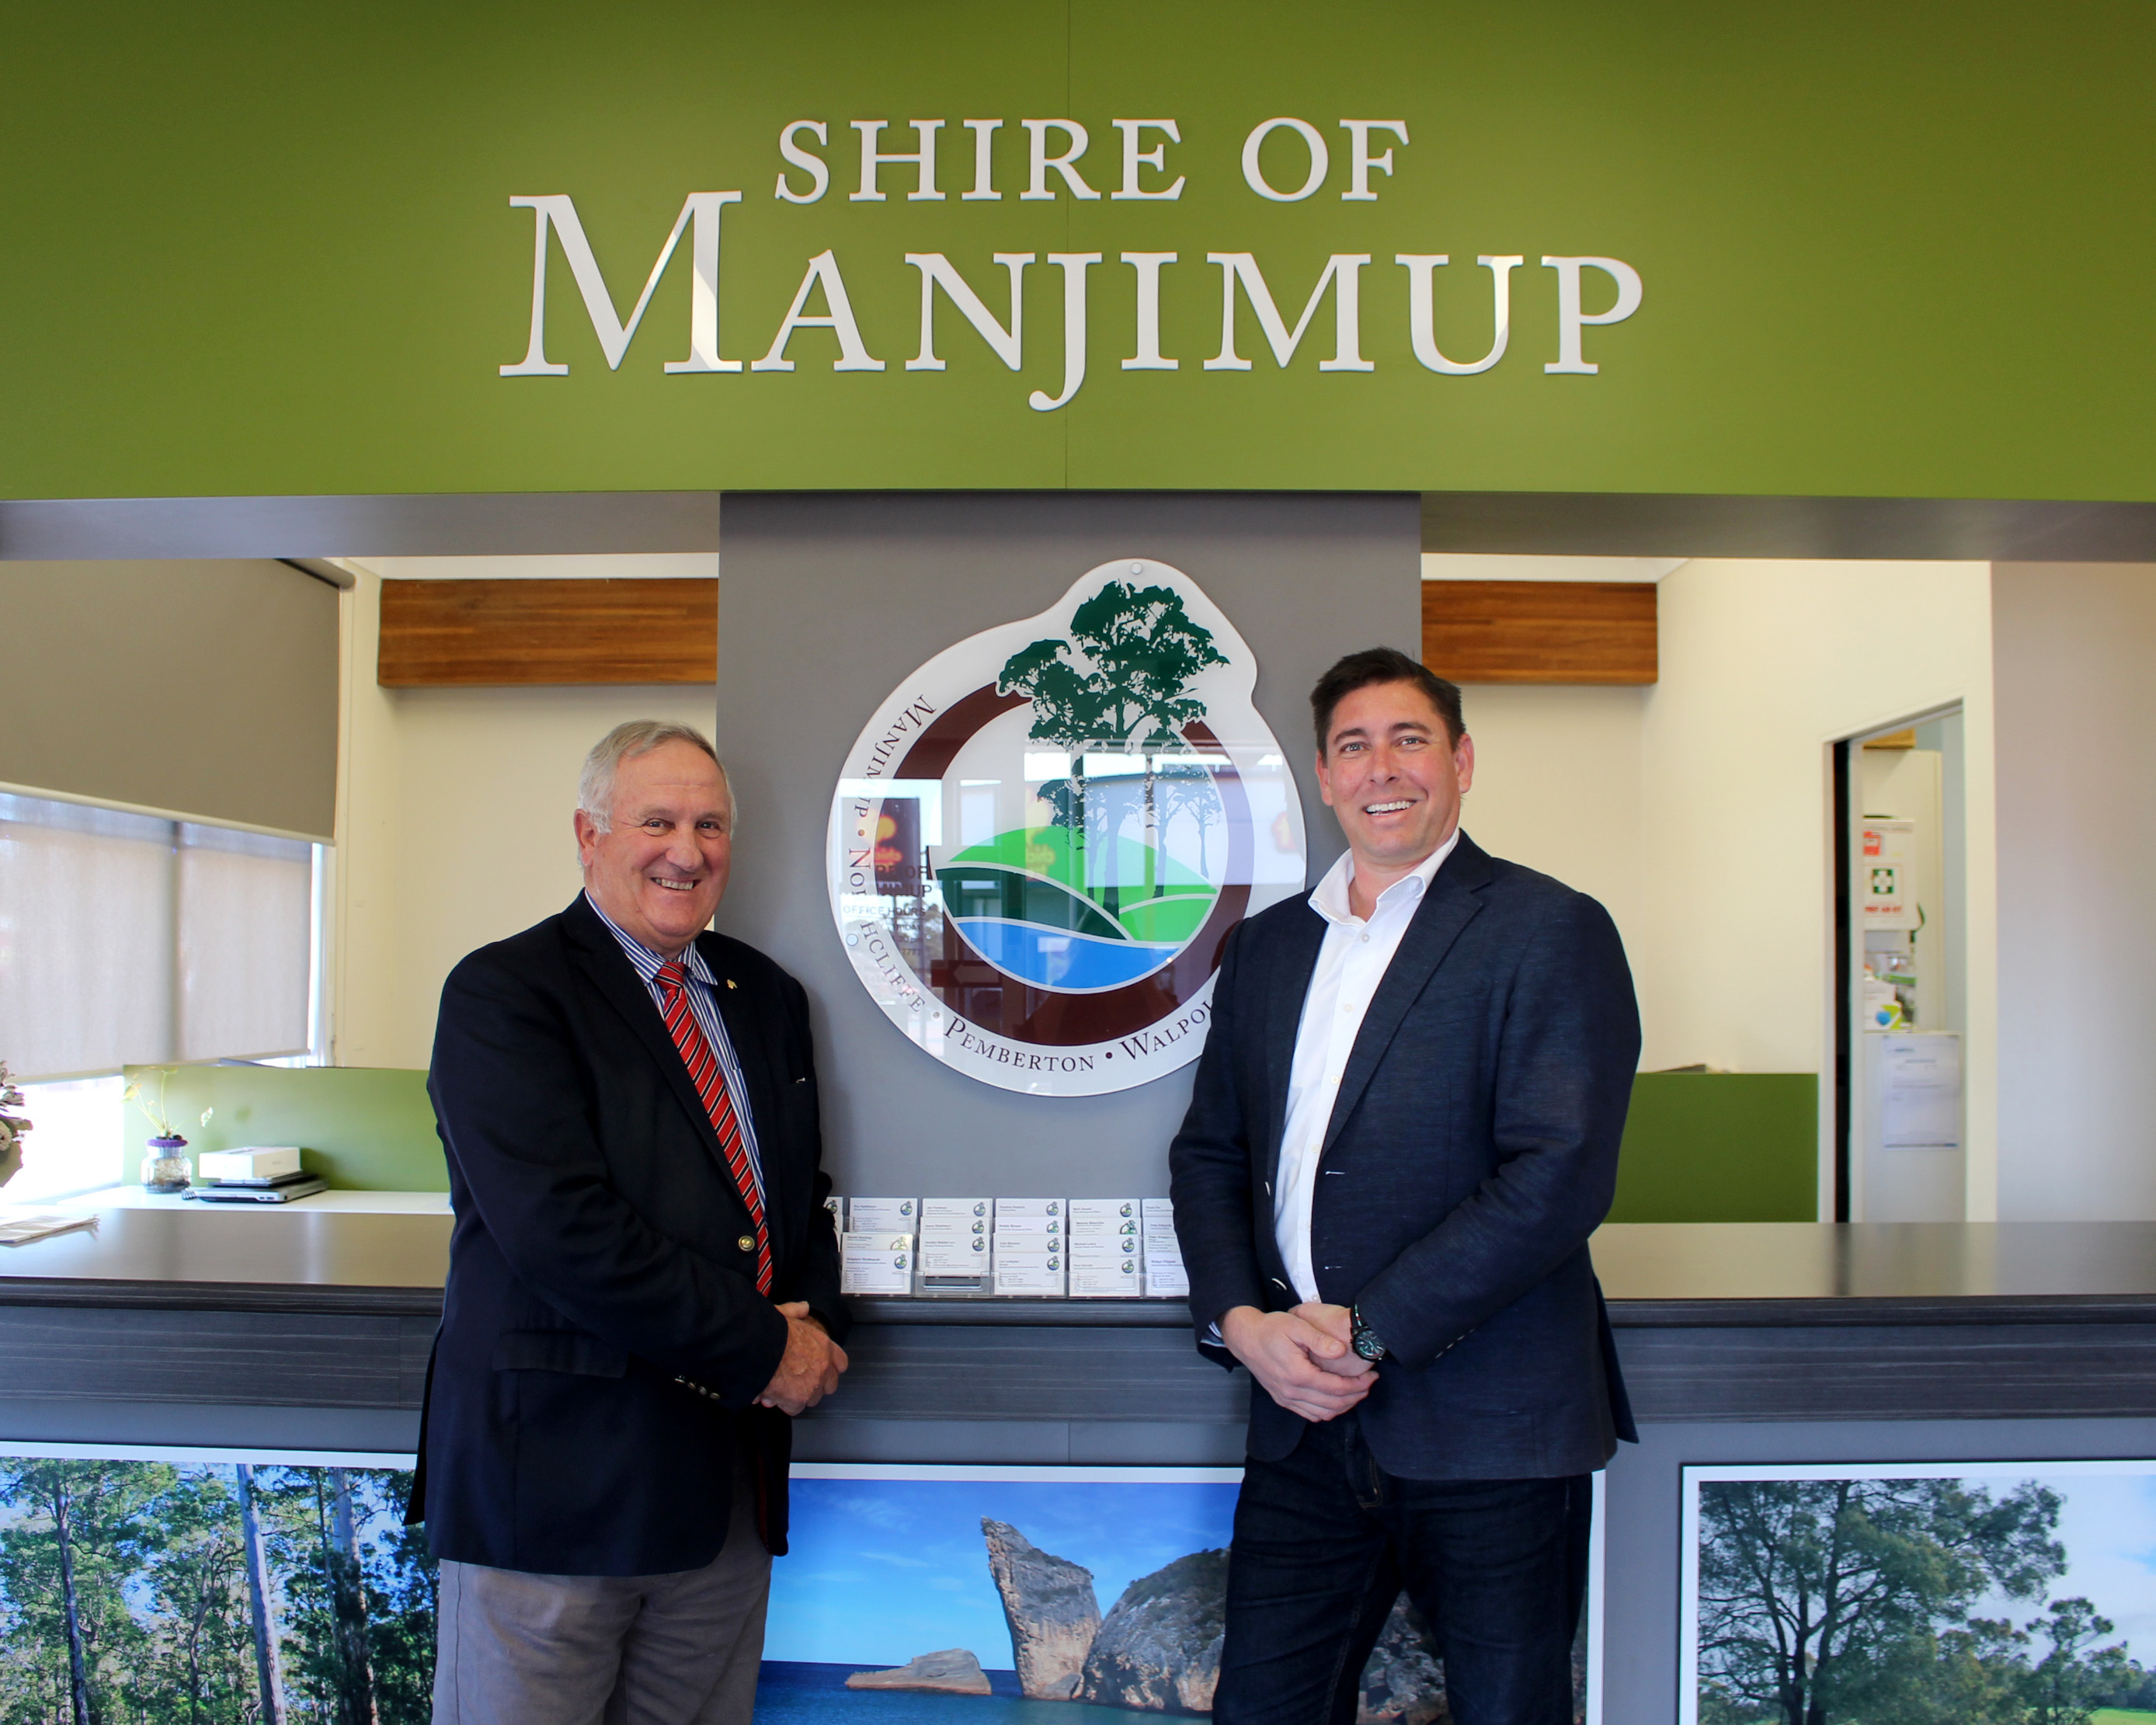 Shire President Paul Omodei and incoming New Chief Executive Officer Ben Rose under the Shire of Manjimup logo in the Shire Administration Building